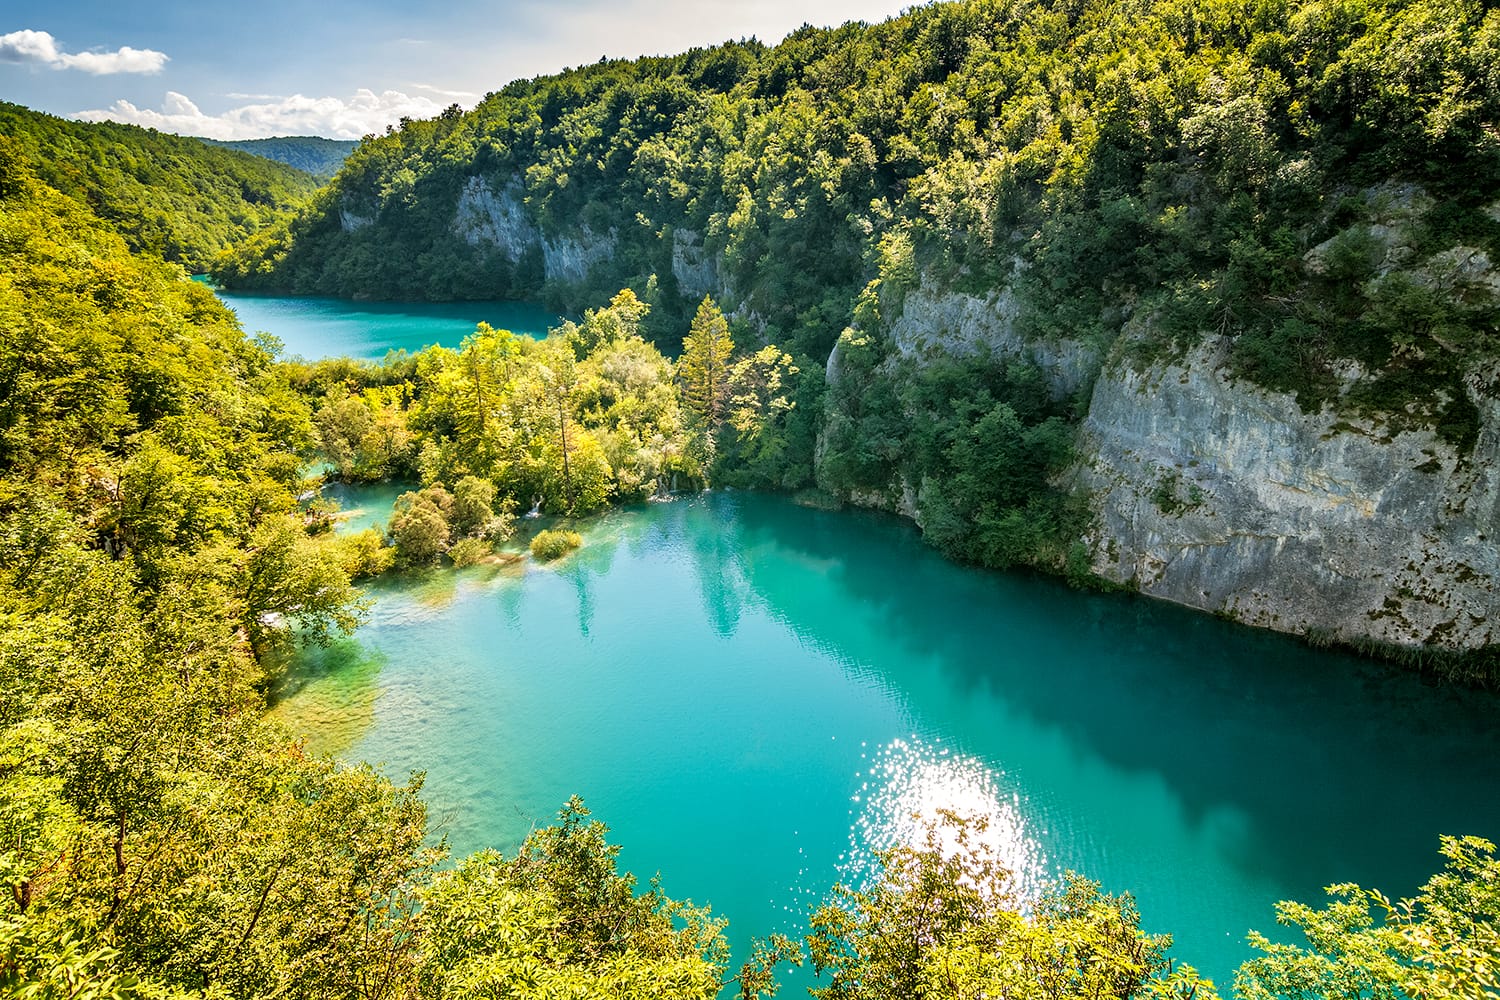 Breathtaking view of the Plitvice Lakes National Park in Croatia